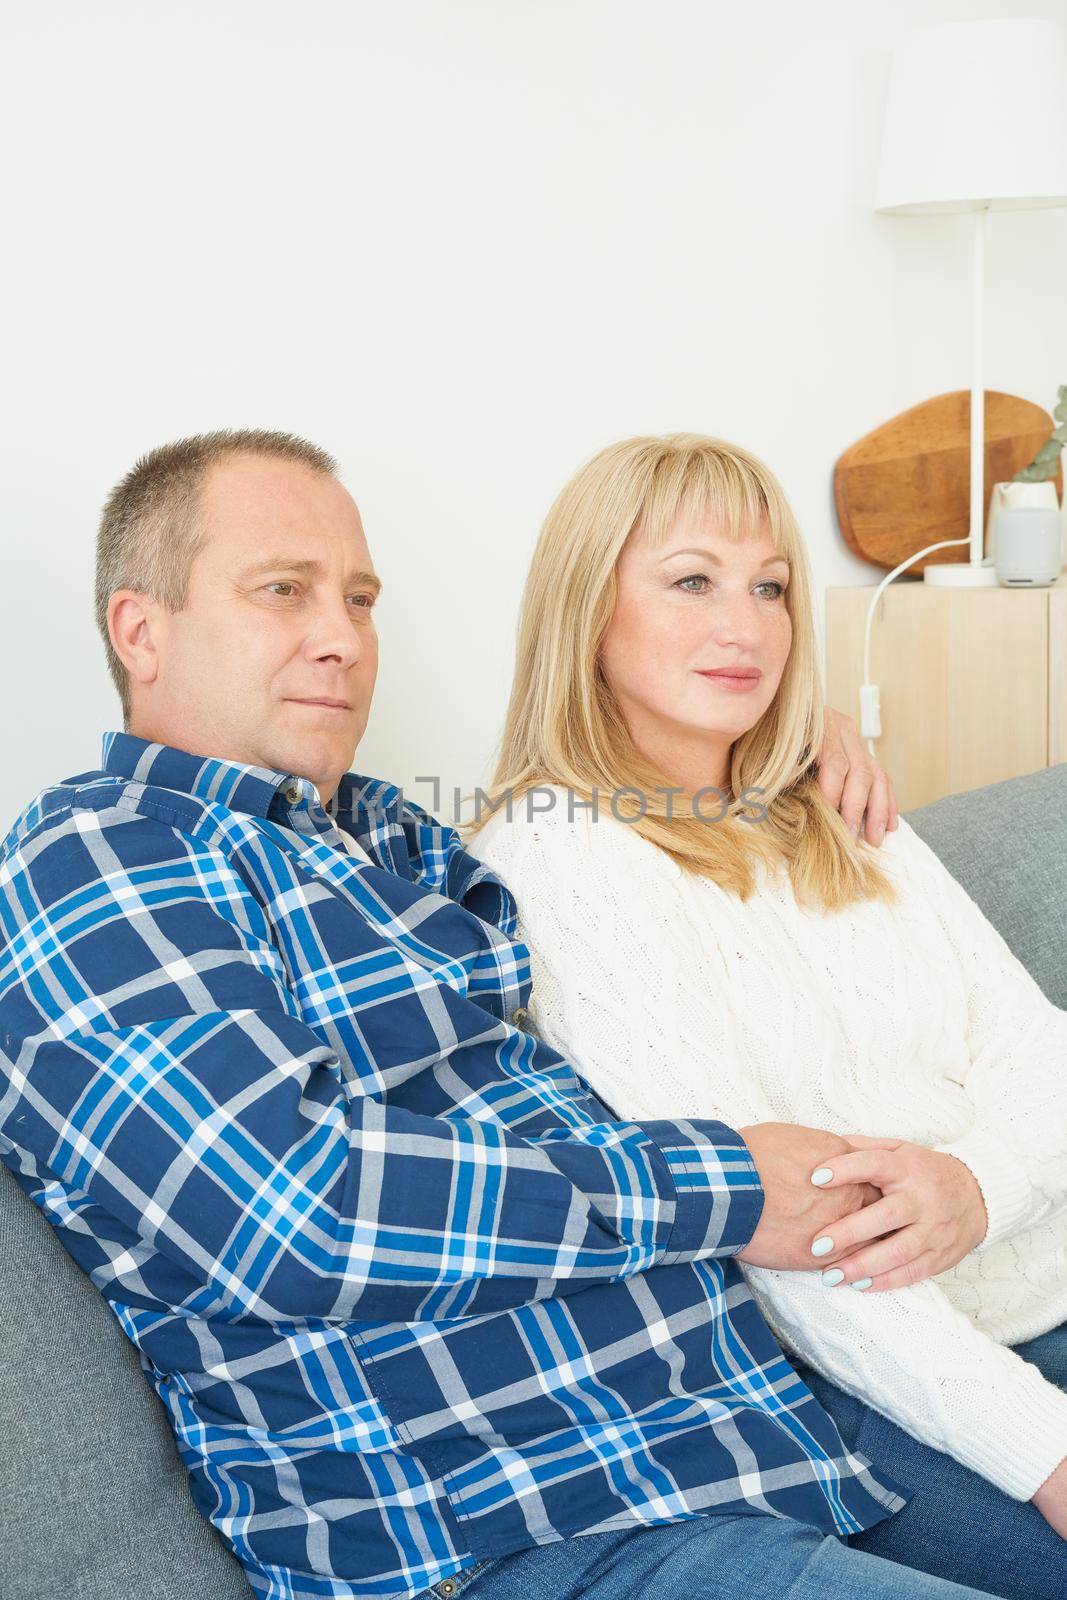 Waist portrait of mature couple in home interior on sofa. Handsome man and attractive middle age woman enjoying spending time together watching movie on TV